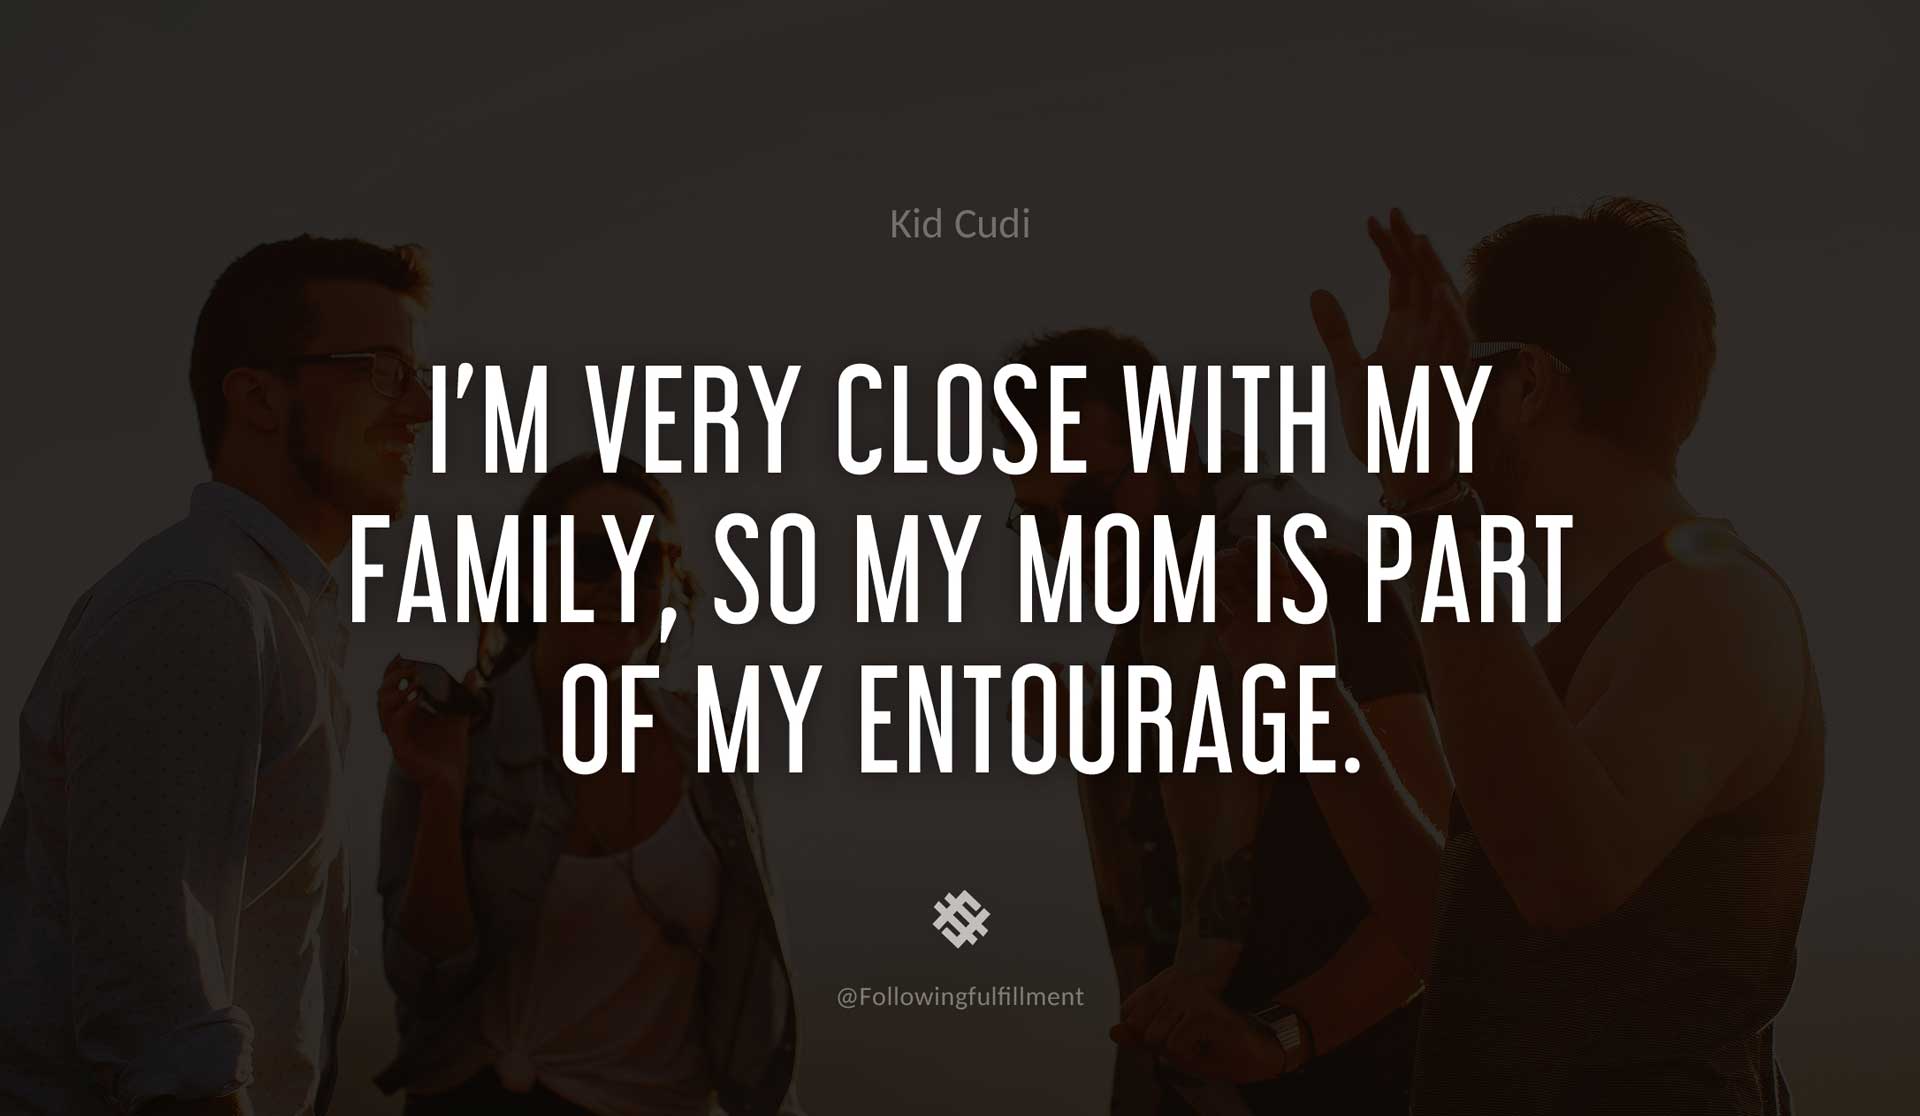 I'm-very-close-with-my-family,-so-my-mom-is-part-of-my-entourage.-KID-CUDI-Quote.jpg